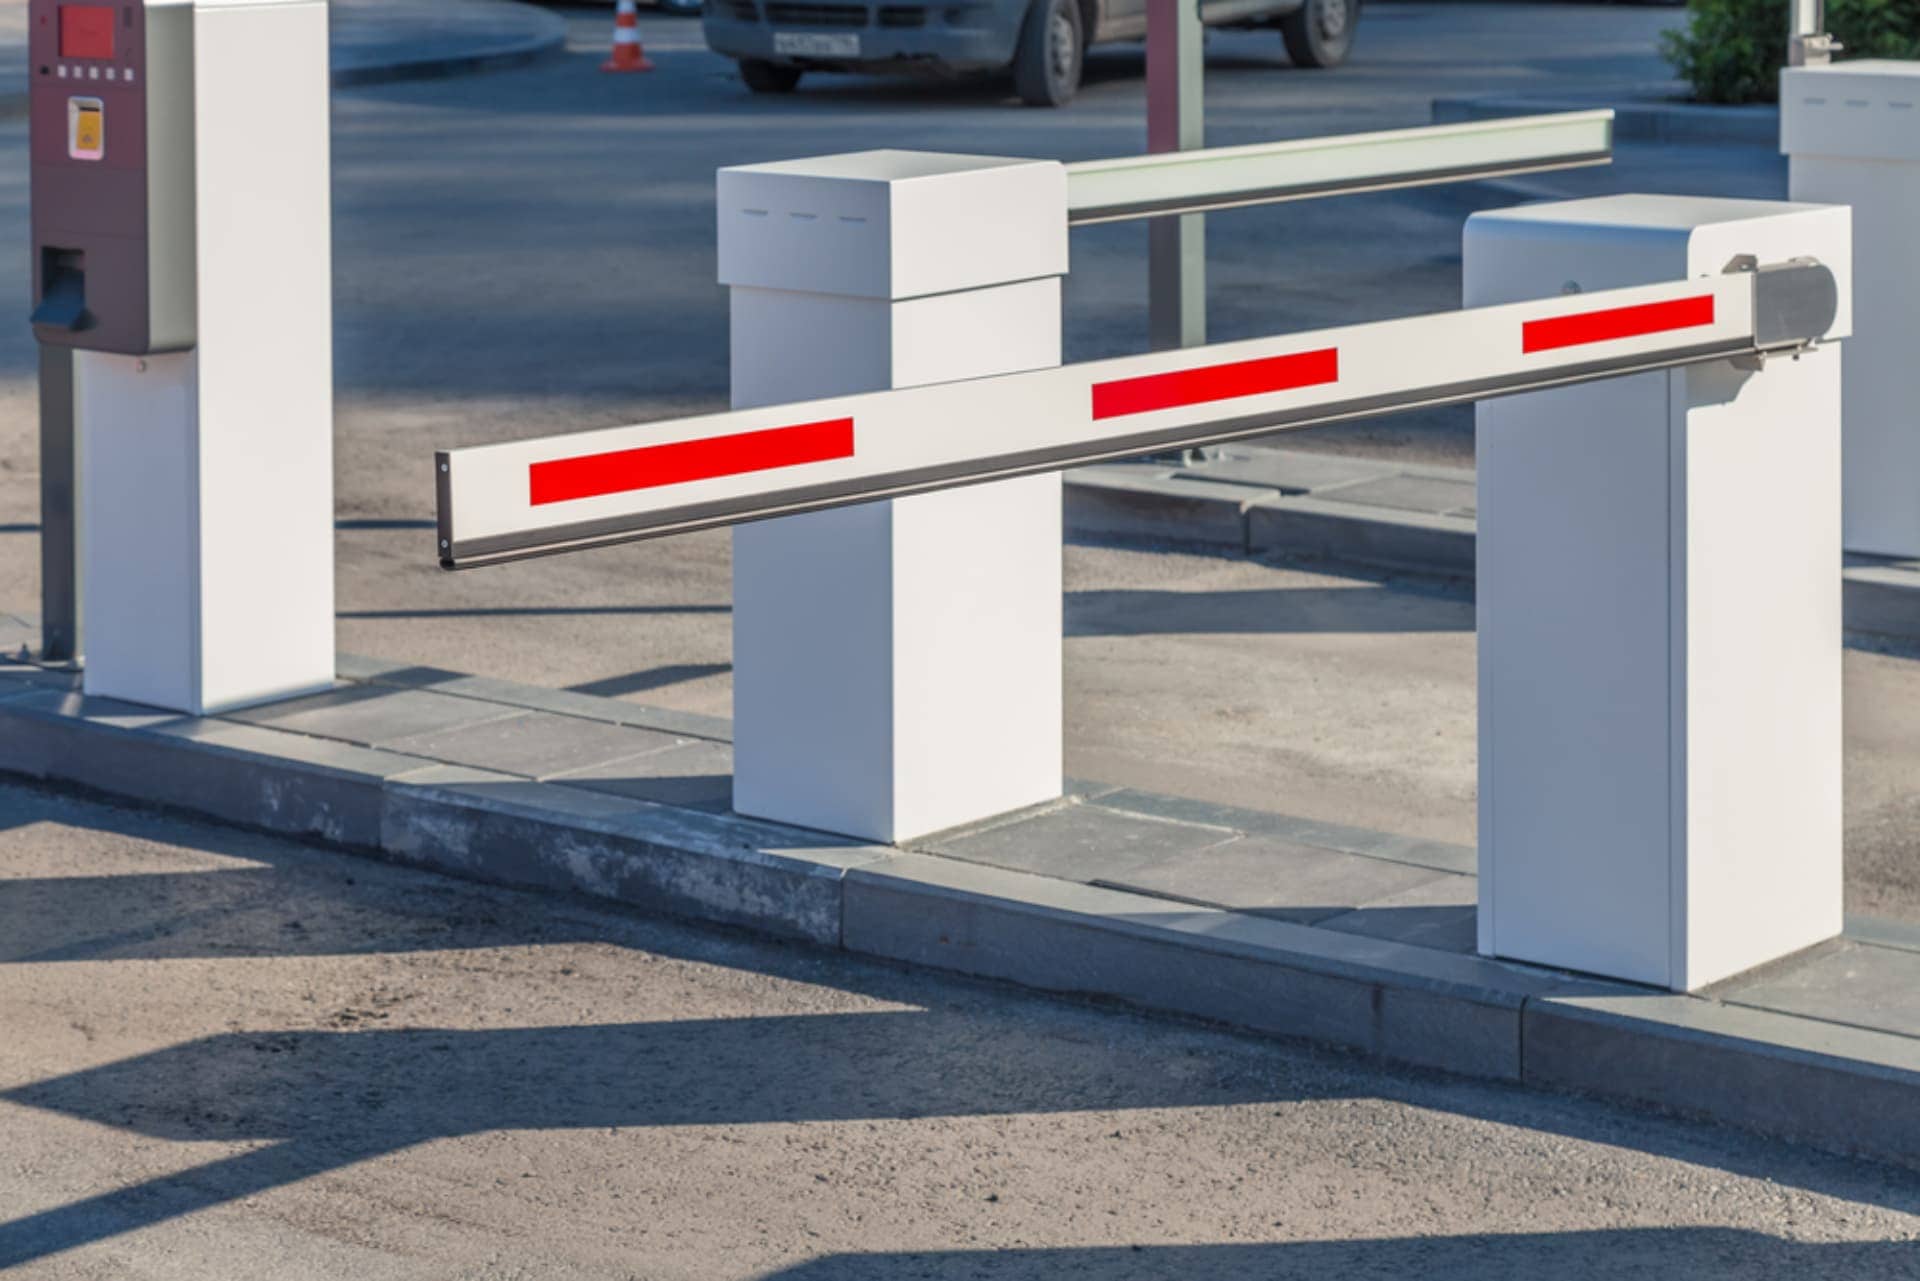 A barrier gate; a type of automatic gate